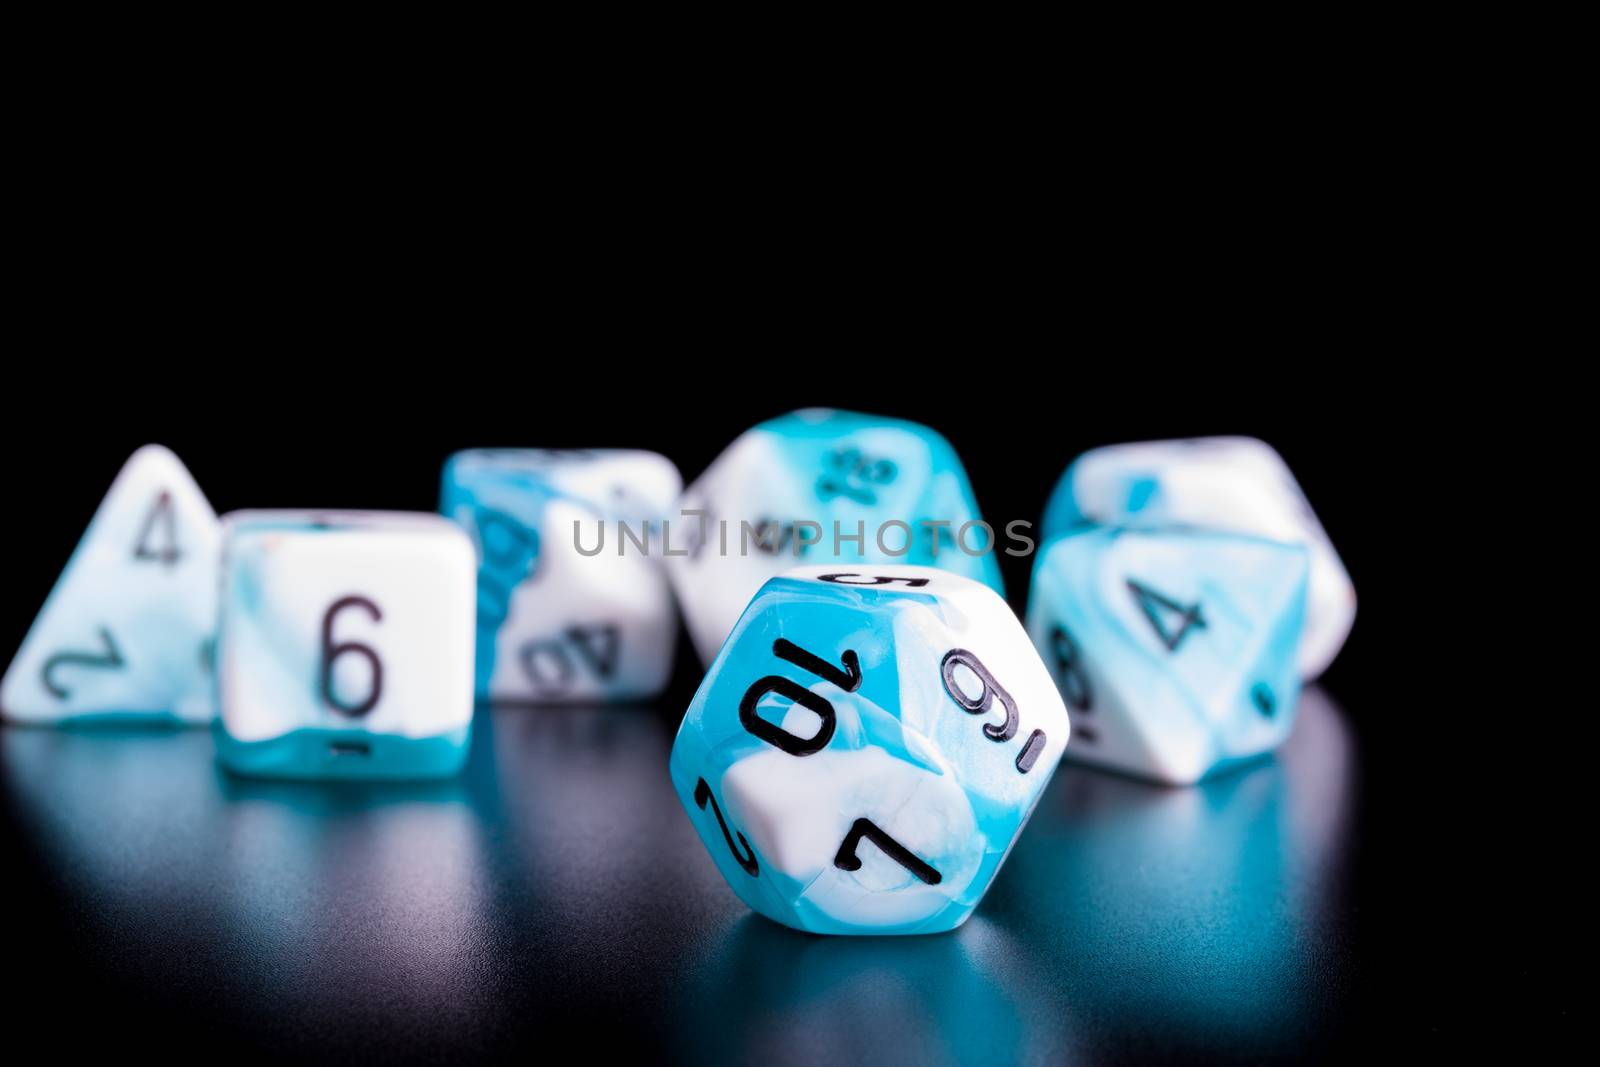 Set of dice for role playing games by lanalanglois